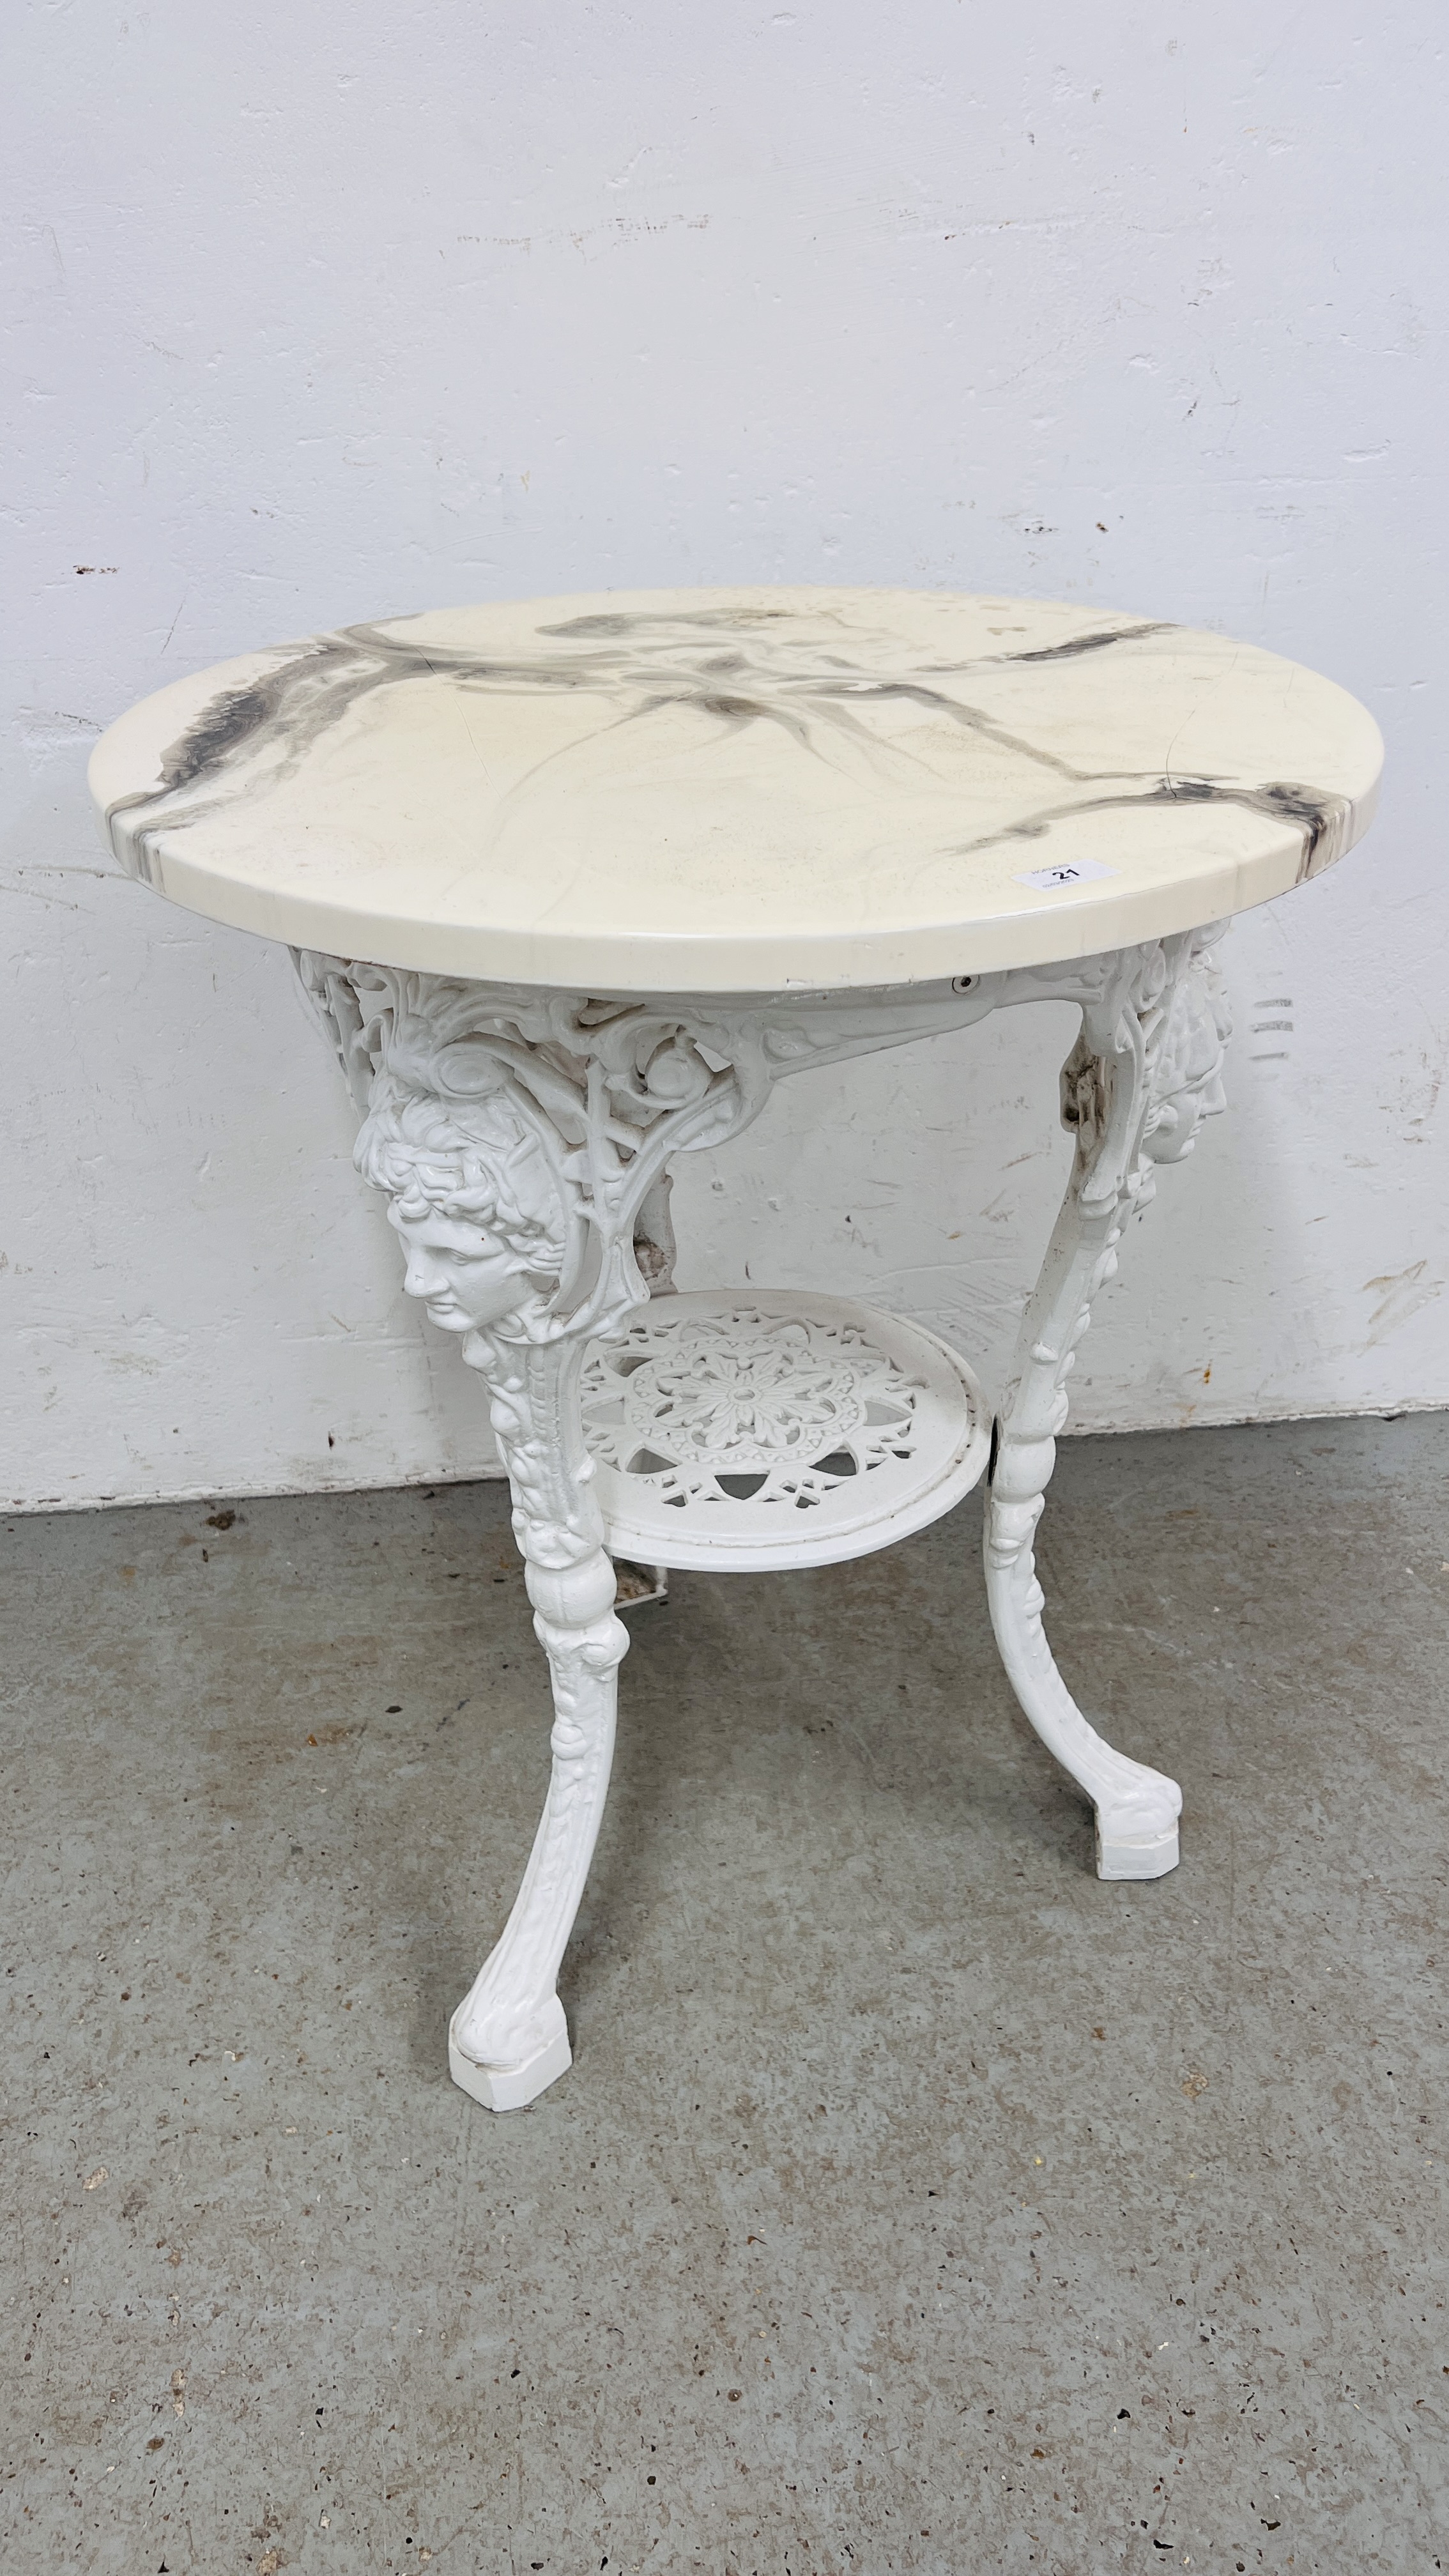 AN IRON PUB TABLE WITH FAUX MARBLE TOP